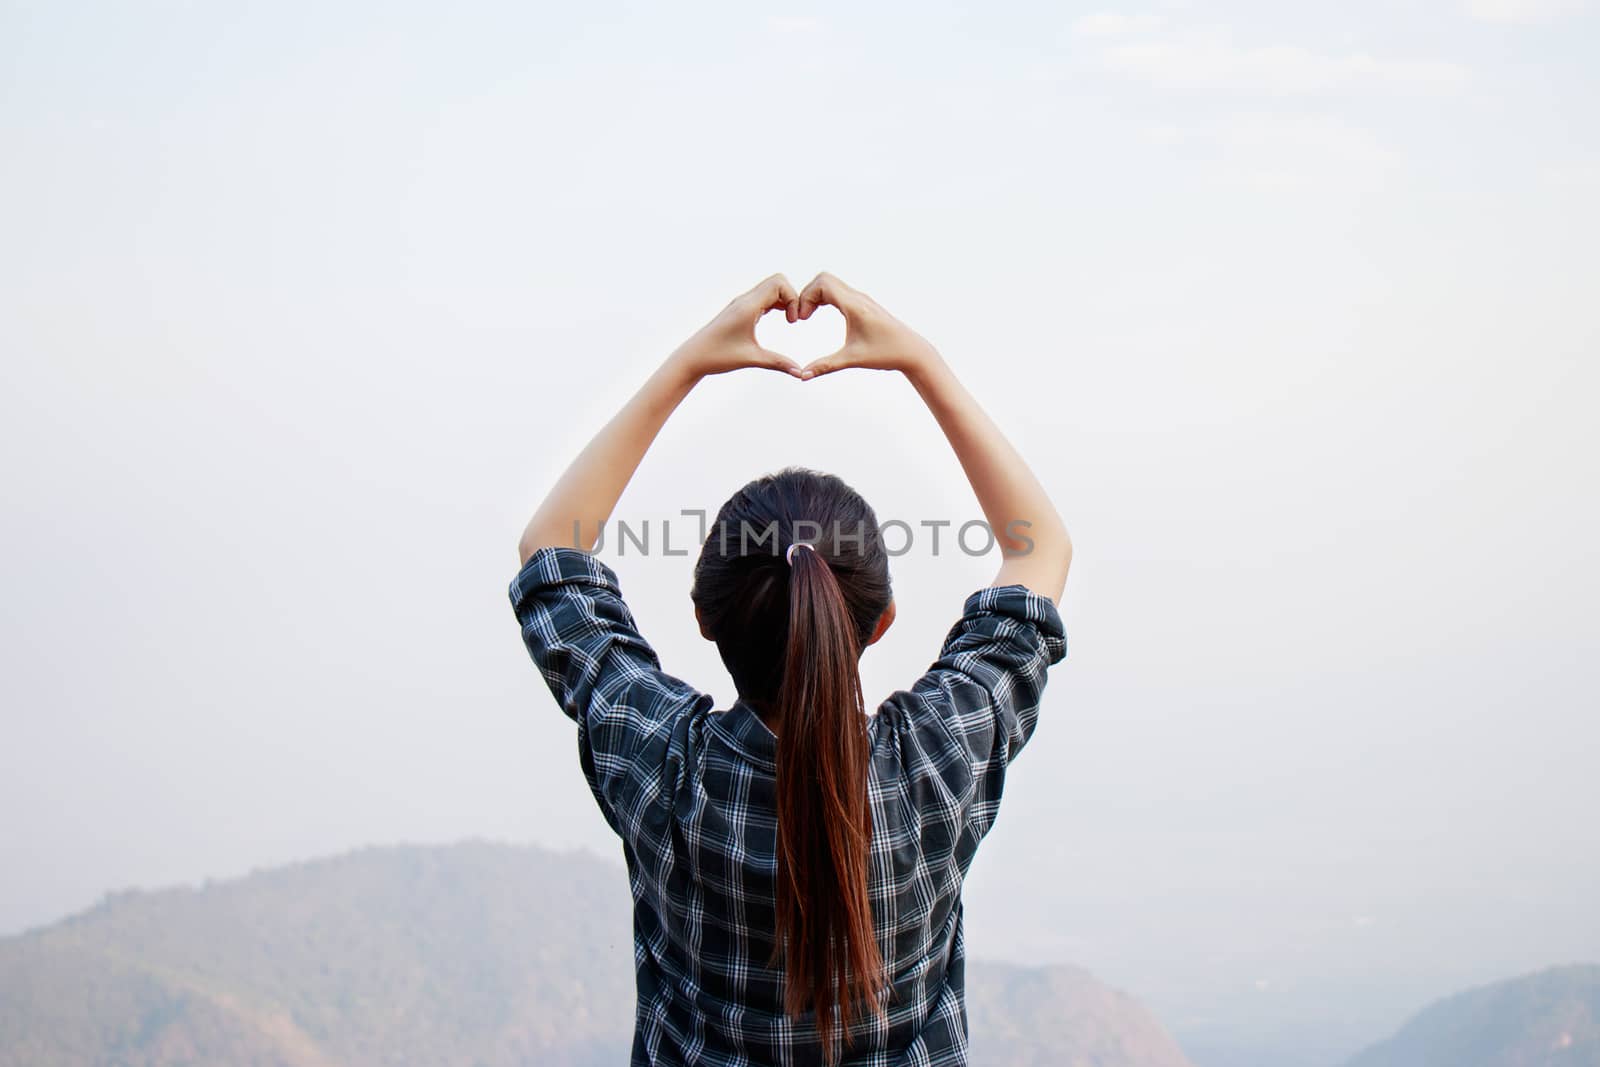 I love travel concept : Freedom traveler woman standing with heart shaped hands and enjoy a wonderful nature